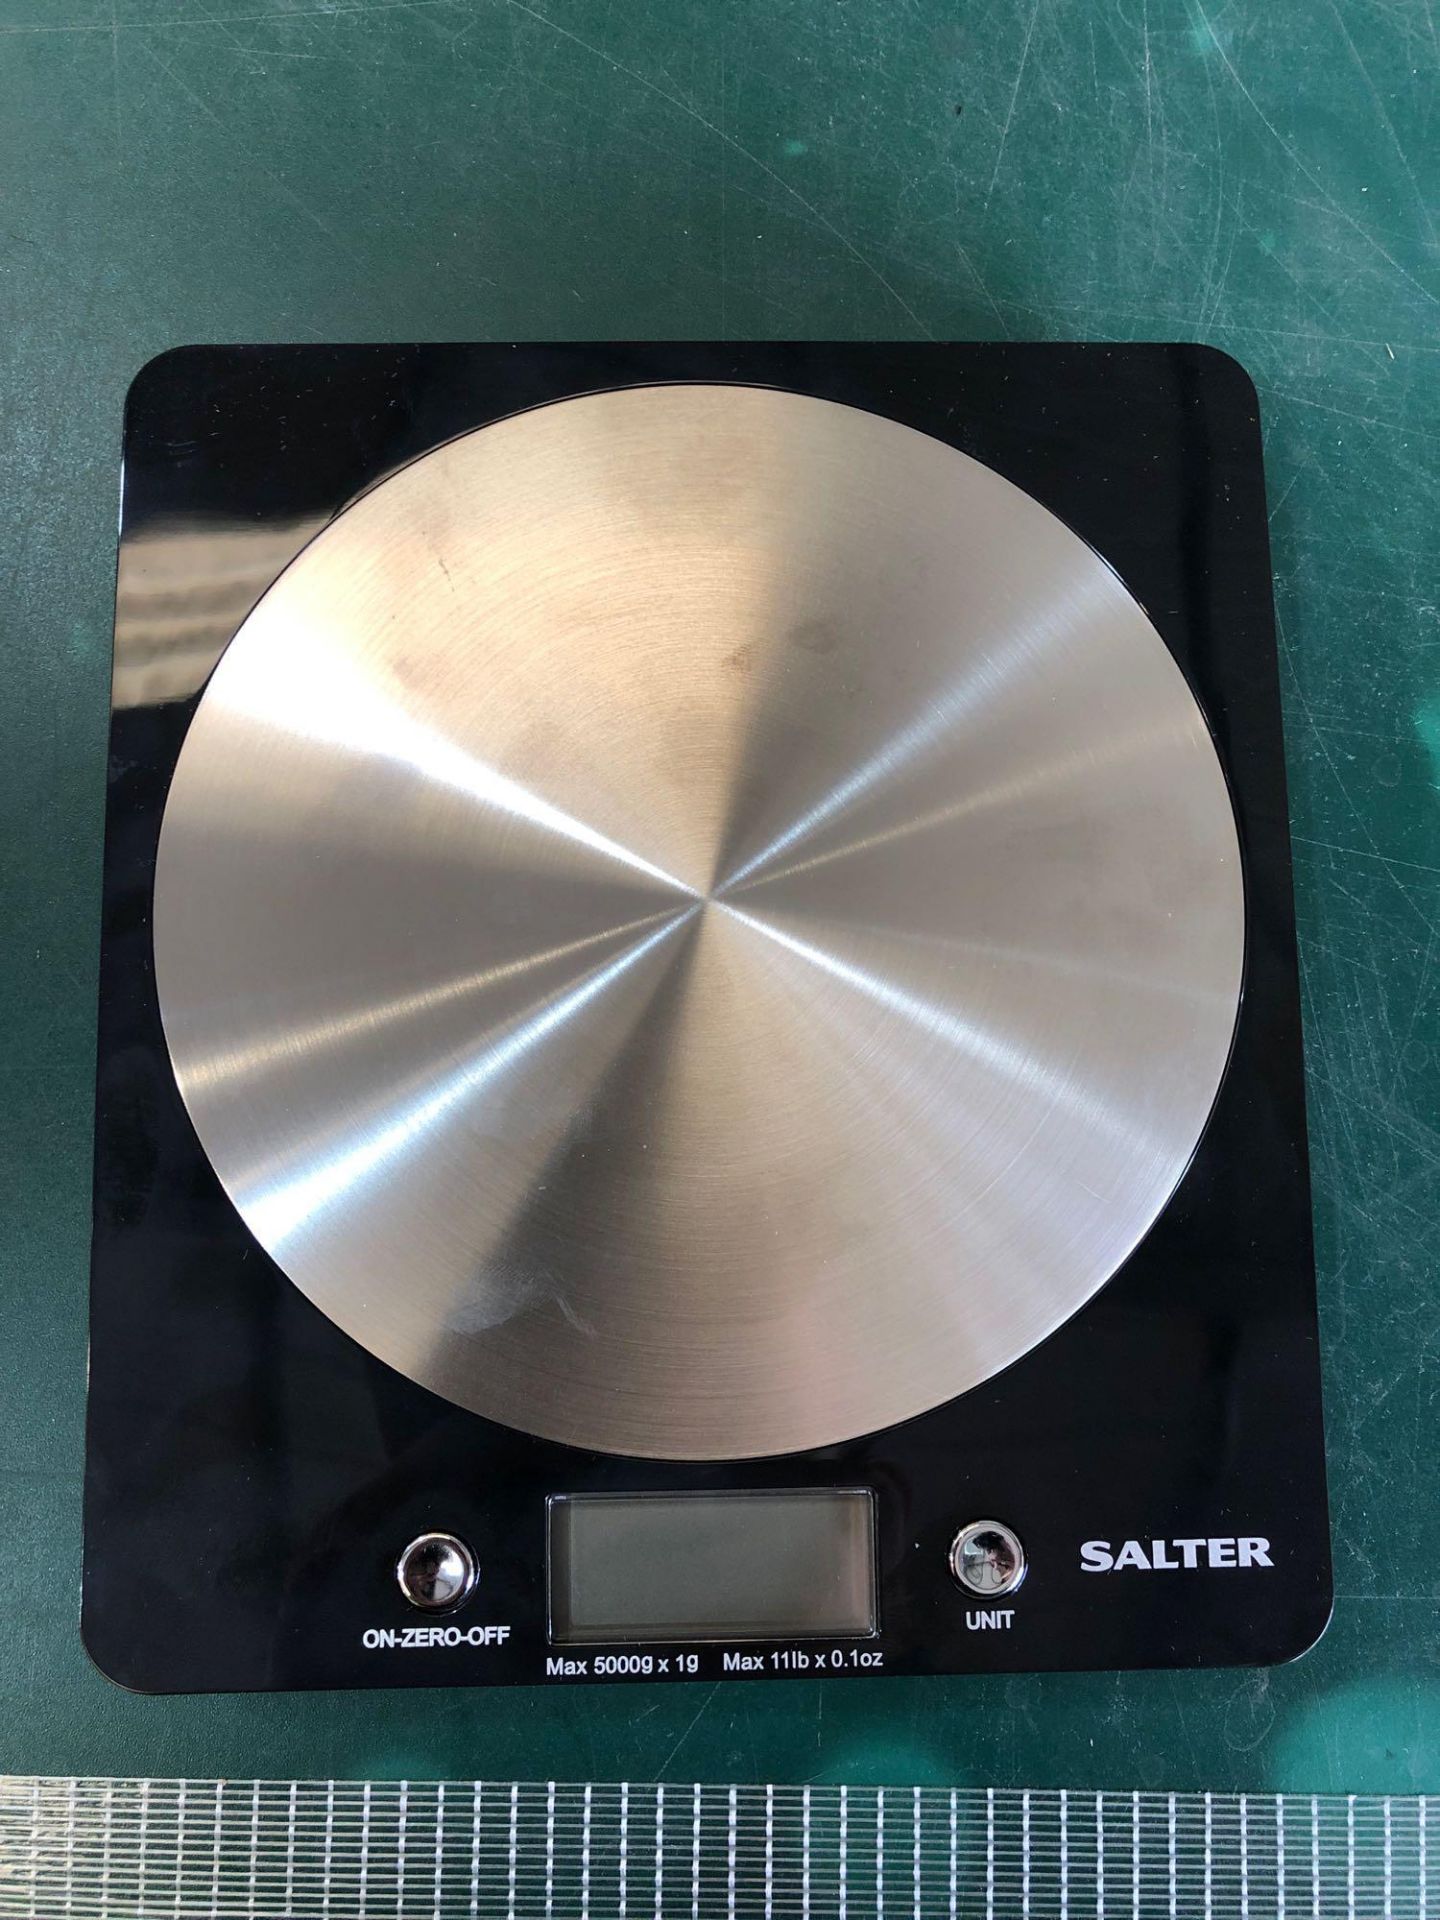 Salter Disc Electronic Digital Kitchen Scales - Black £13.29 RRP - Image 2 of 4